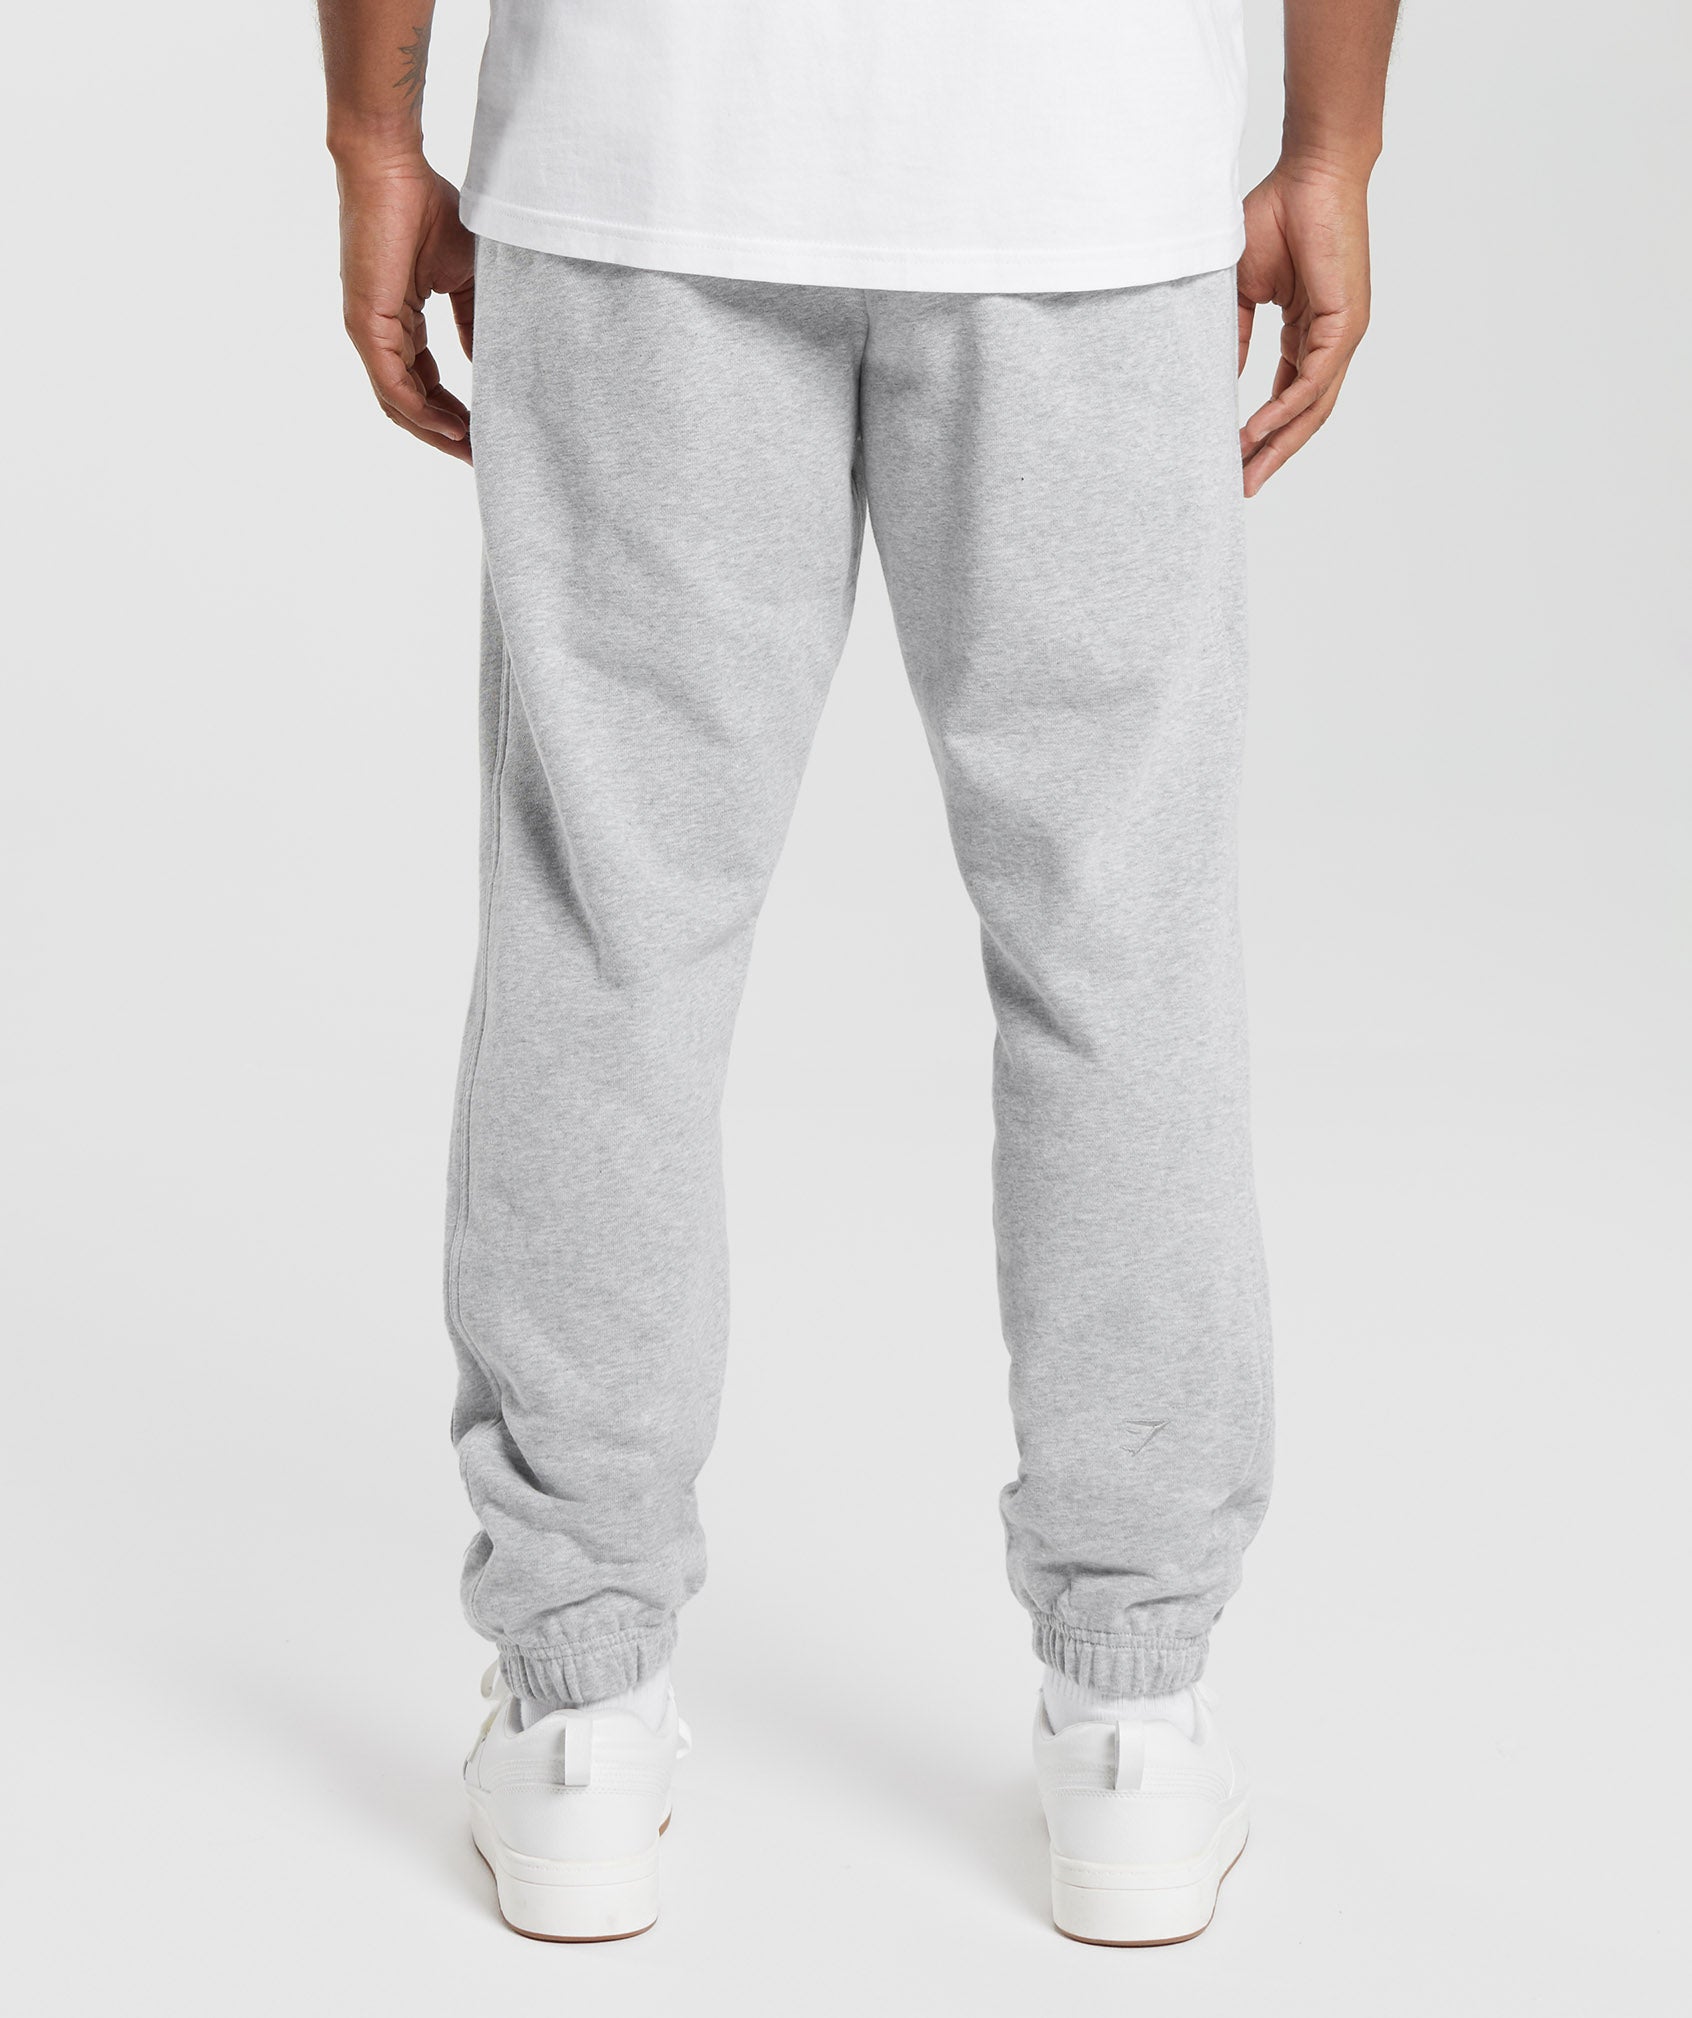 Rest Day Essentials Joggers in Light Grey Core Marl - view 2